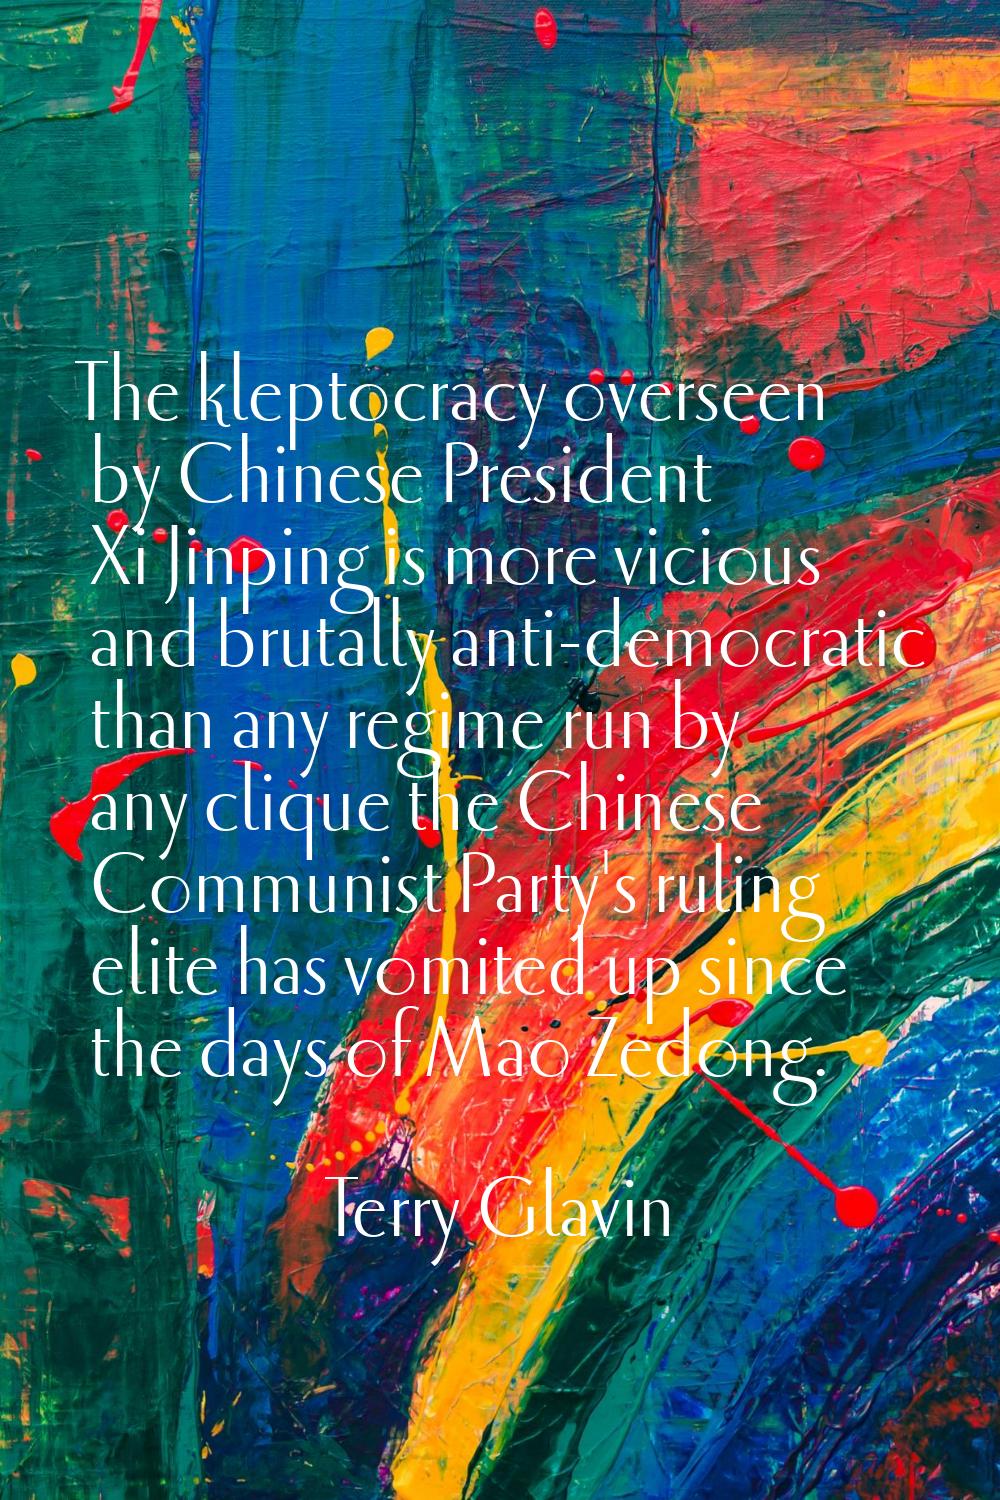 The kleptocracy overseen by Chinese President Xi Jinping is more vicious and brutally anti-democrat